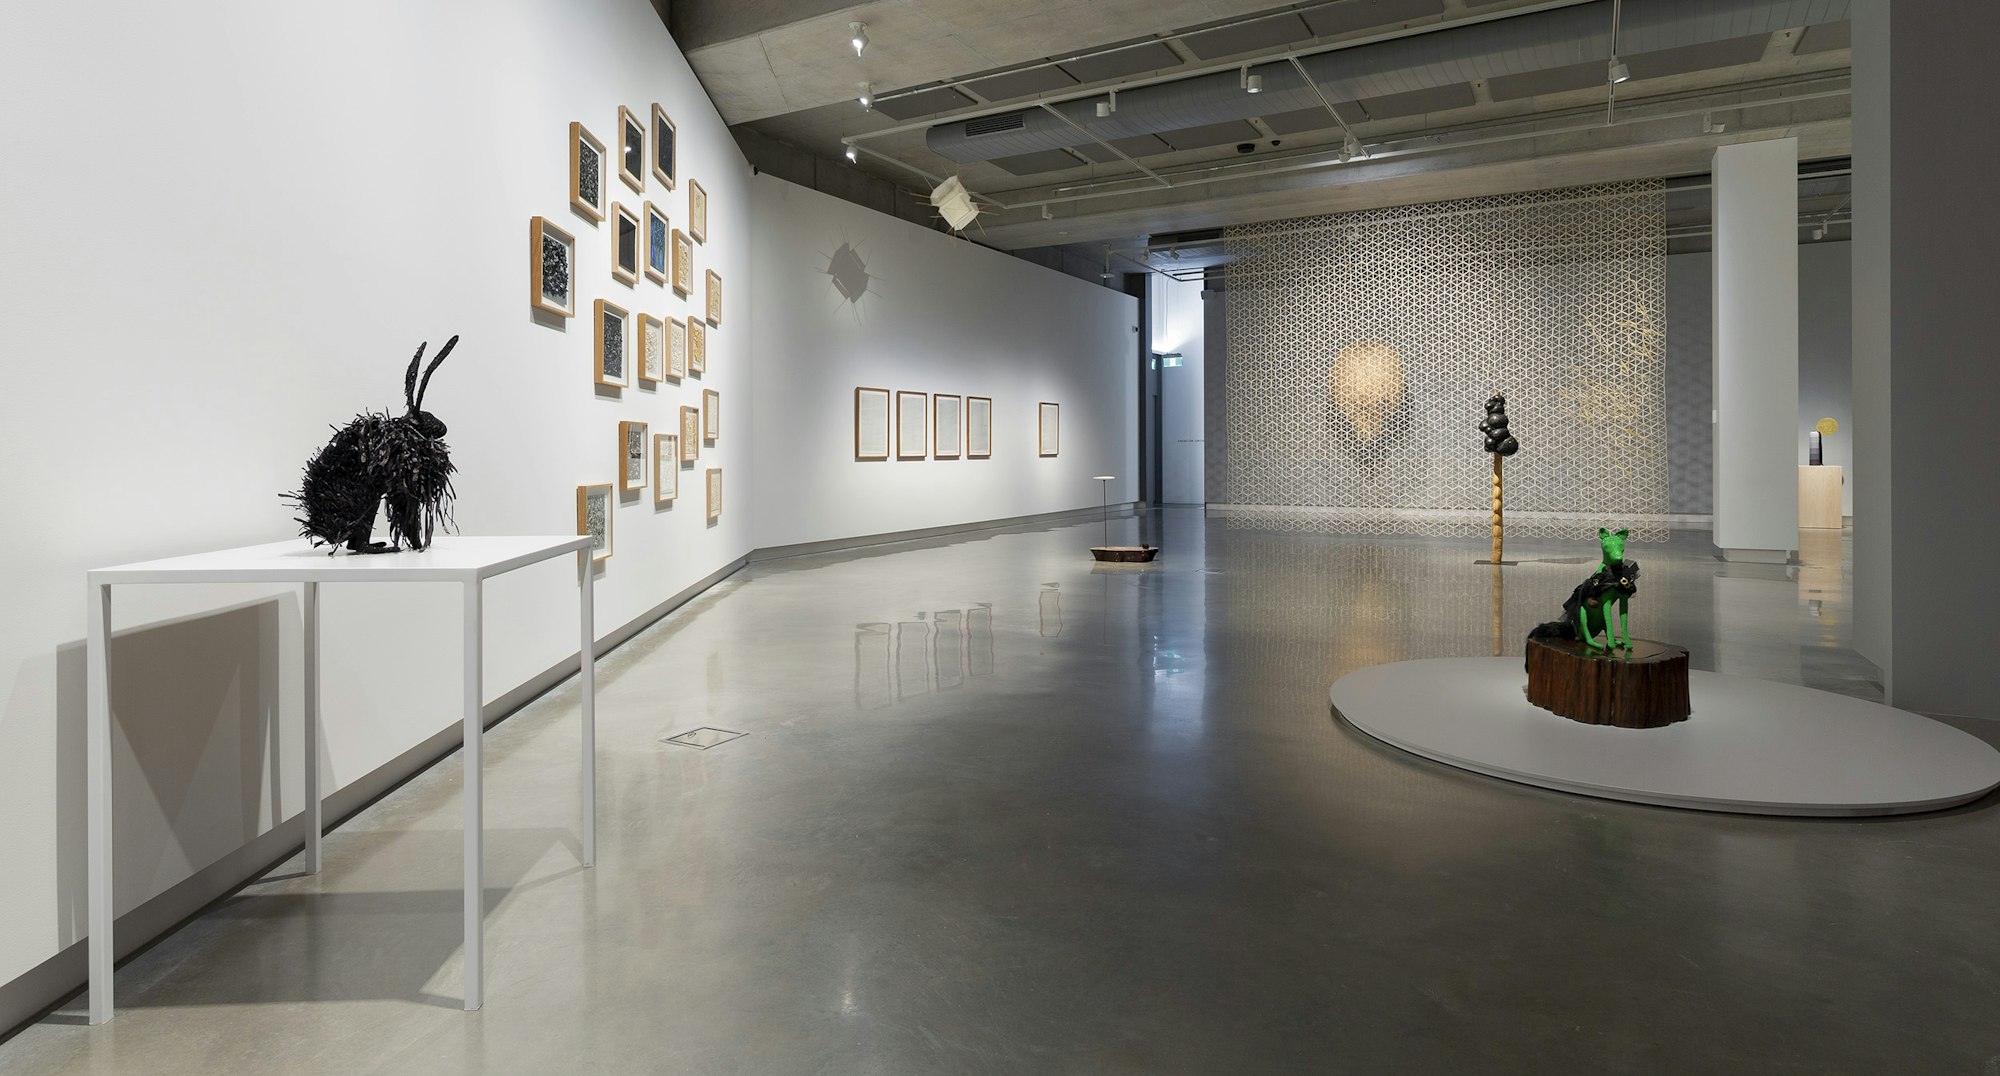 Installation view of Between Appearances: The Art of Louise Weaver, Buxton Contemporary, the University of Melbourne, 2019, courtesy of the artist, photo: Christian Capurro